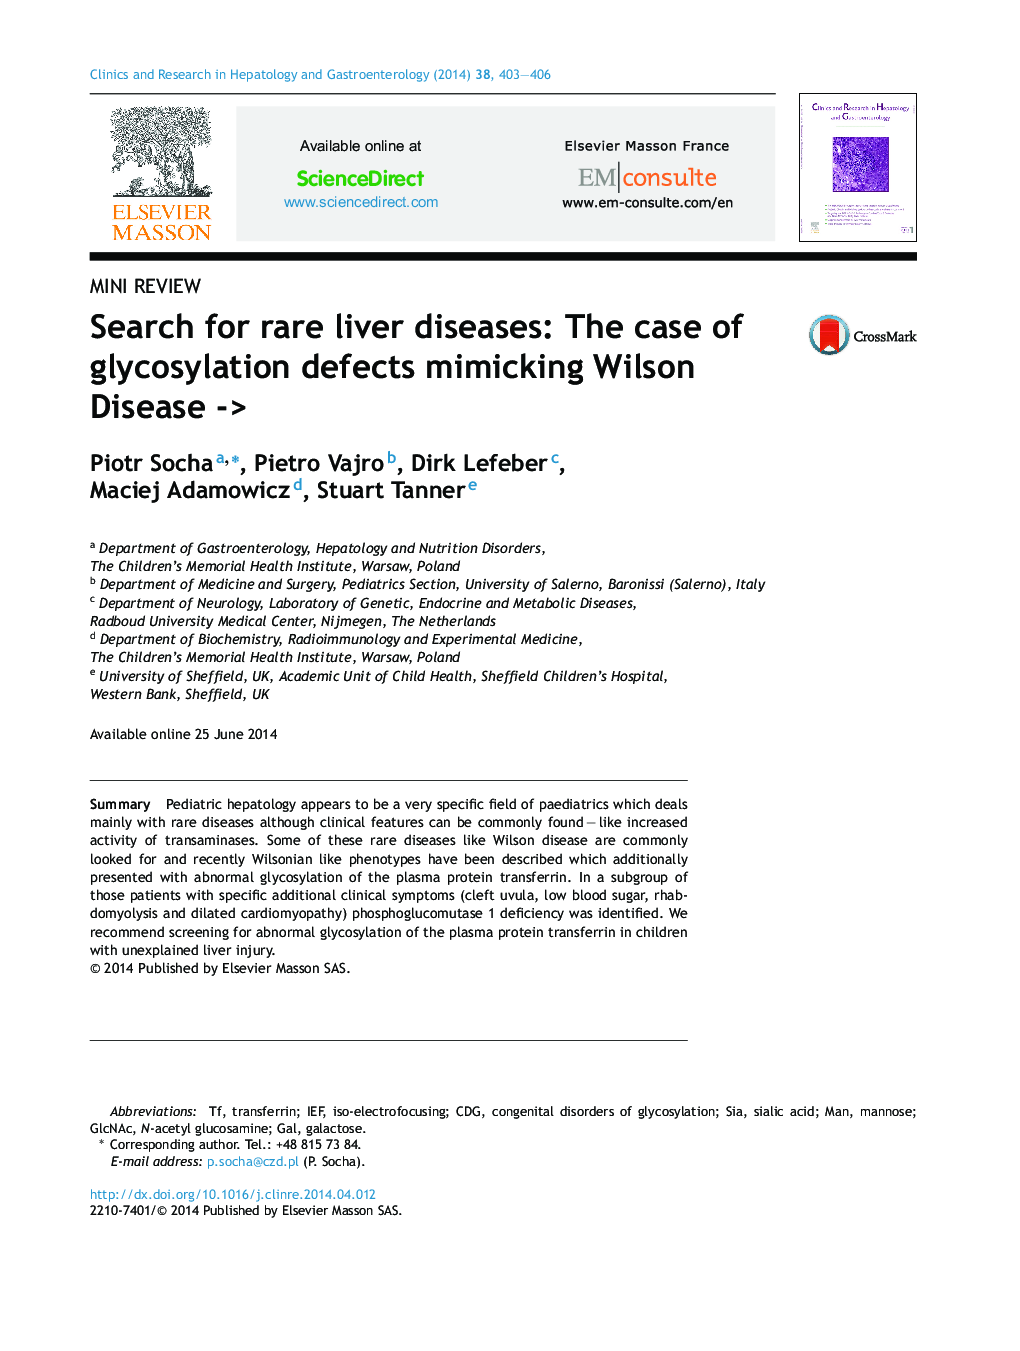 Search for rare liver diseases: The case of glycosylation defects mimicking Wilson Disease ->